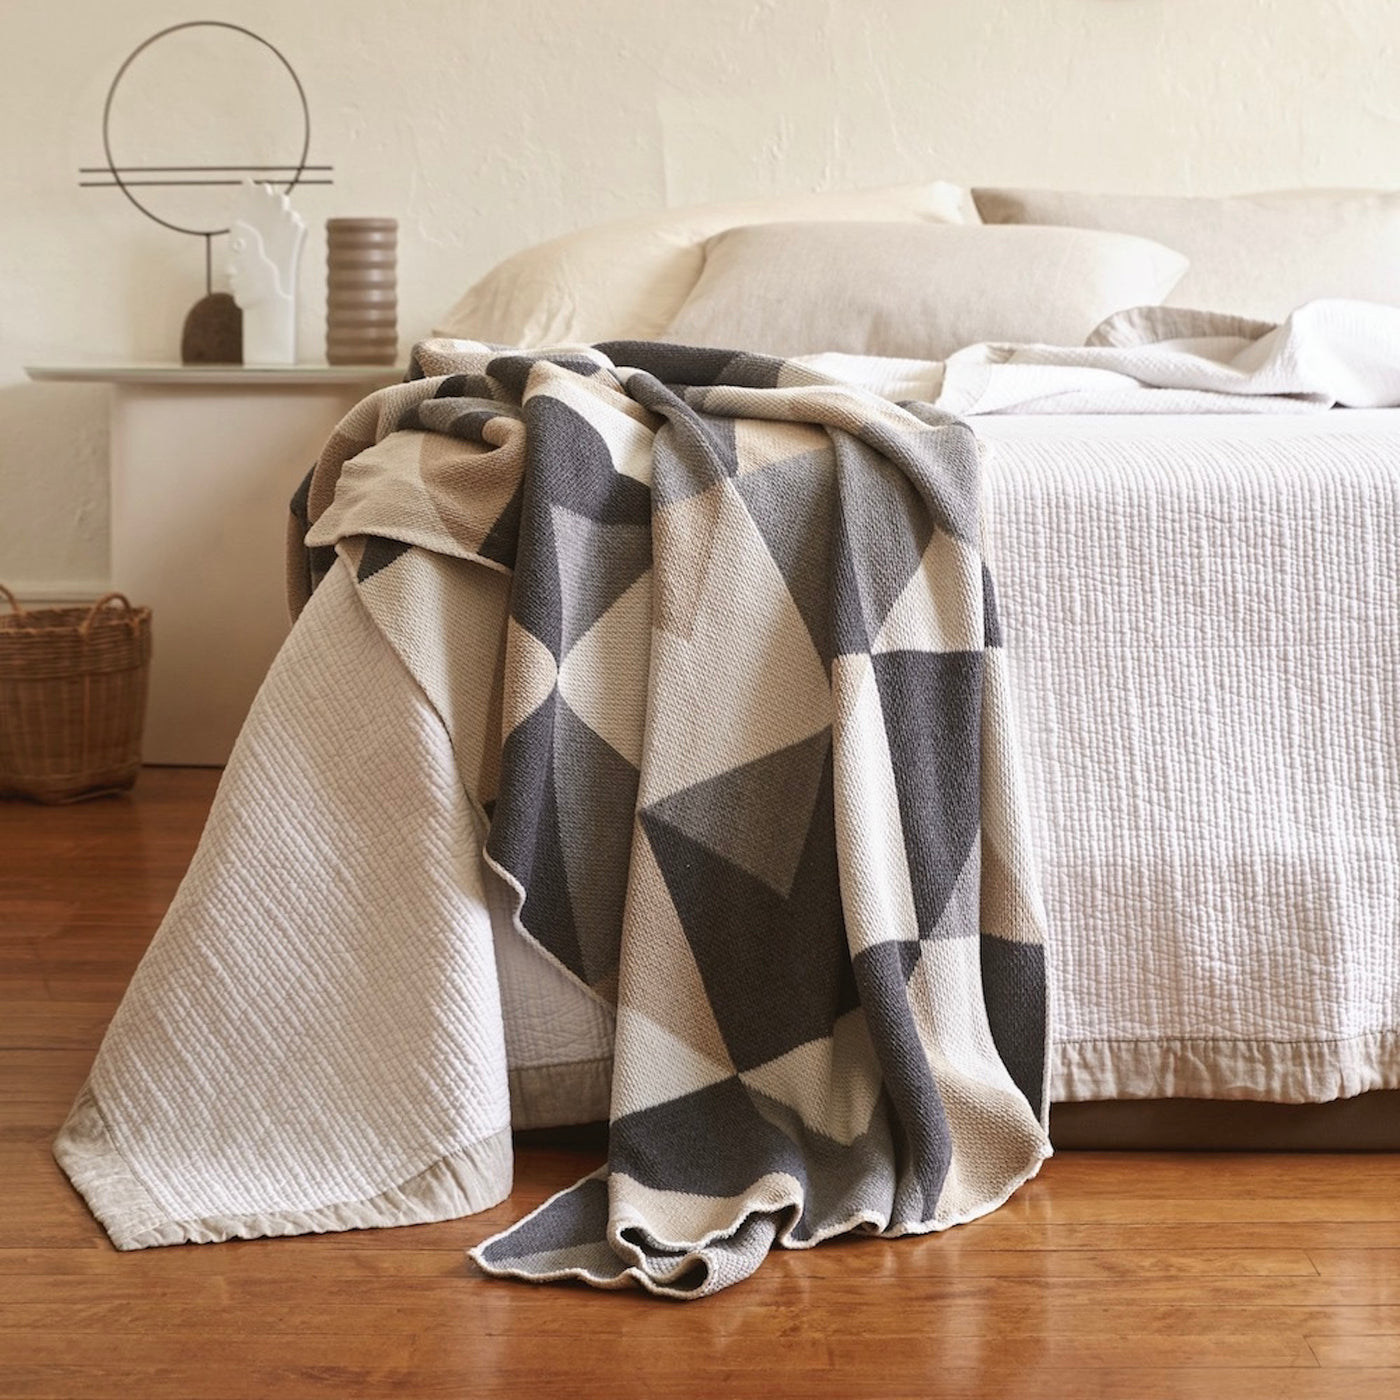 White Bed with Grey and Beige Patterned Throw 